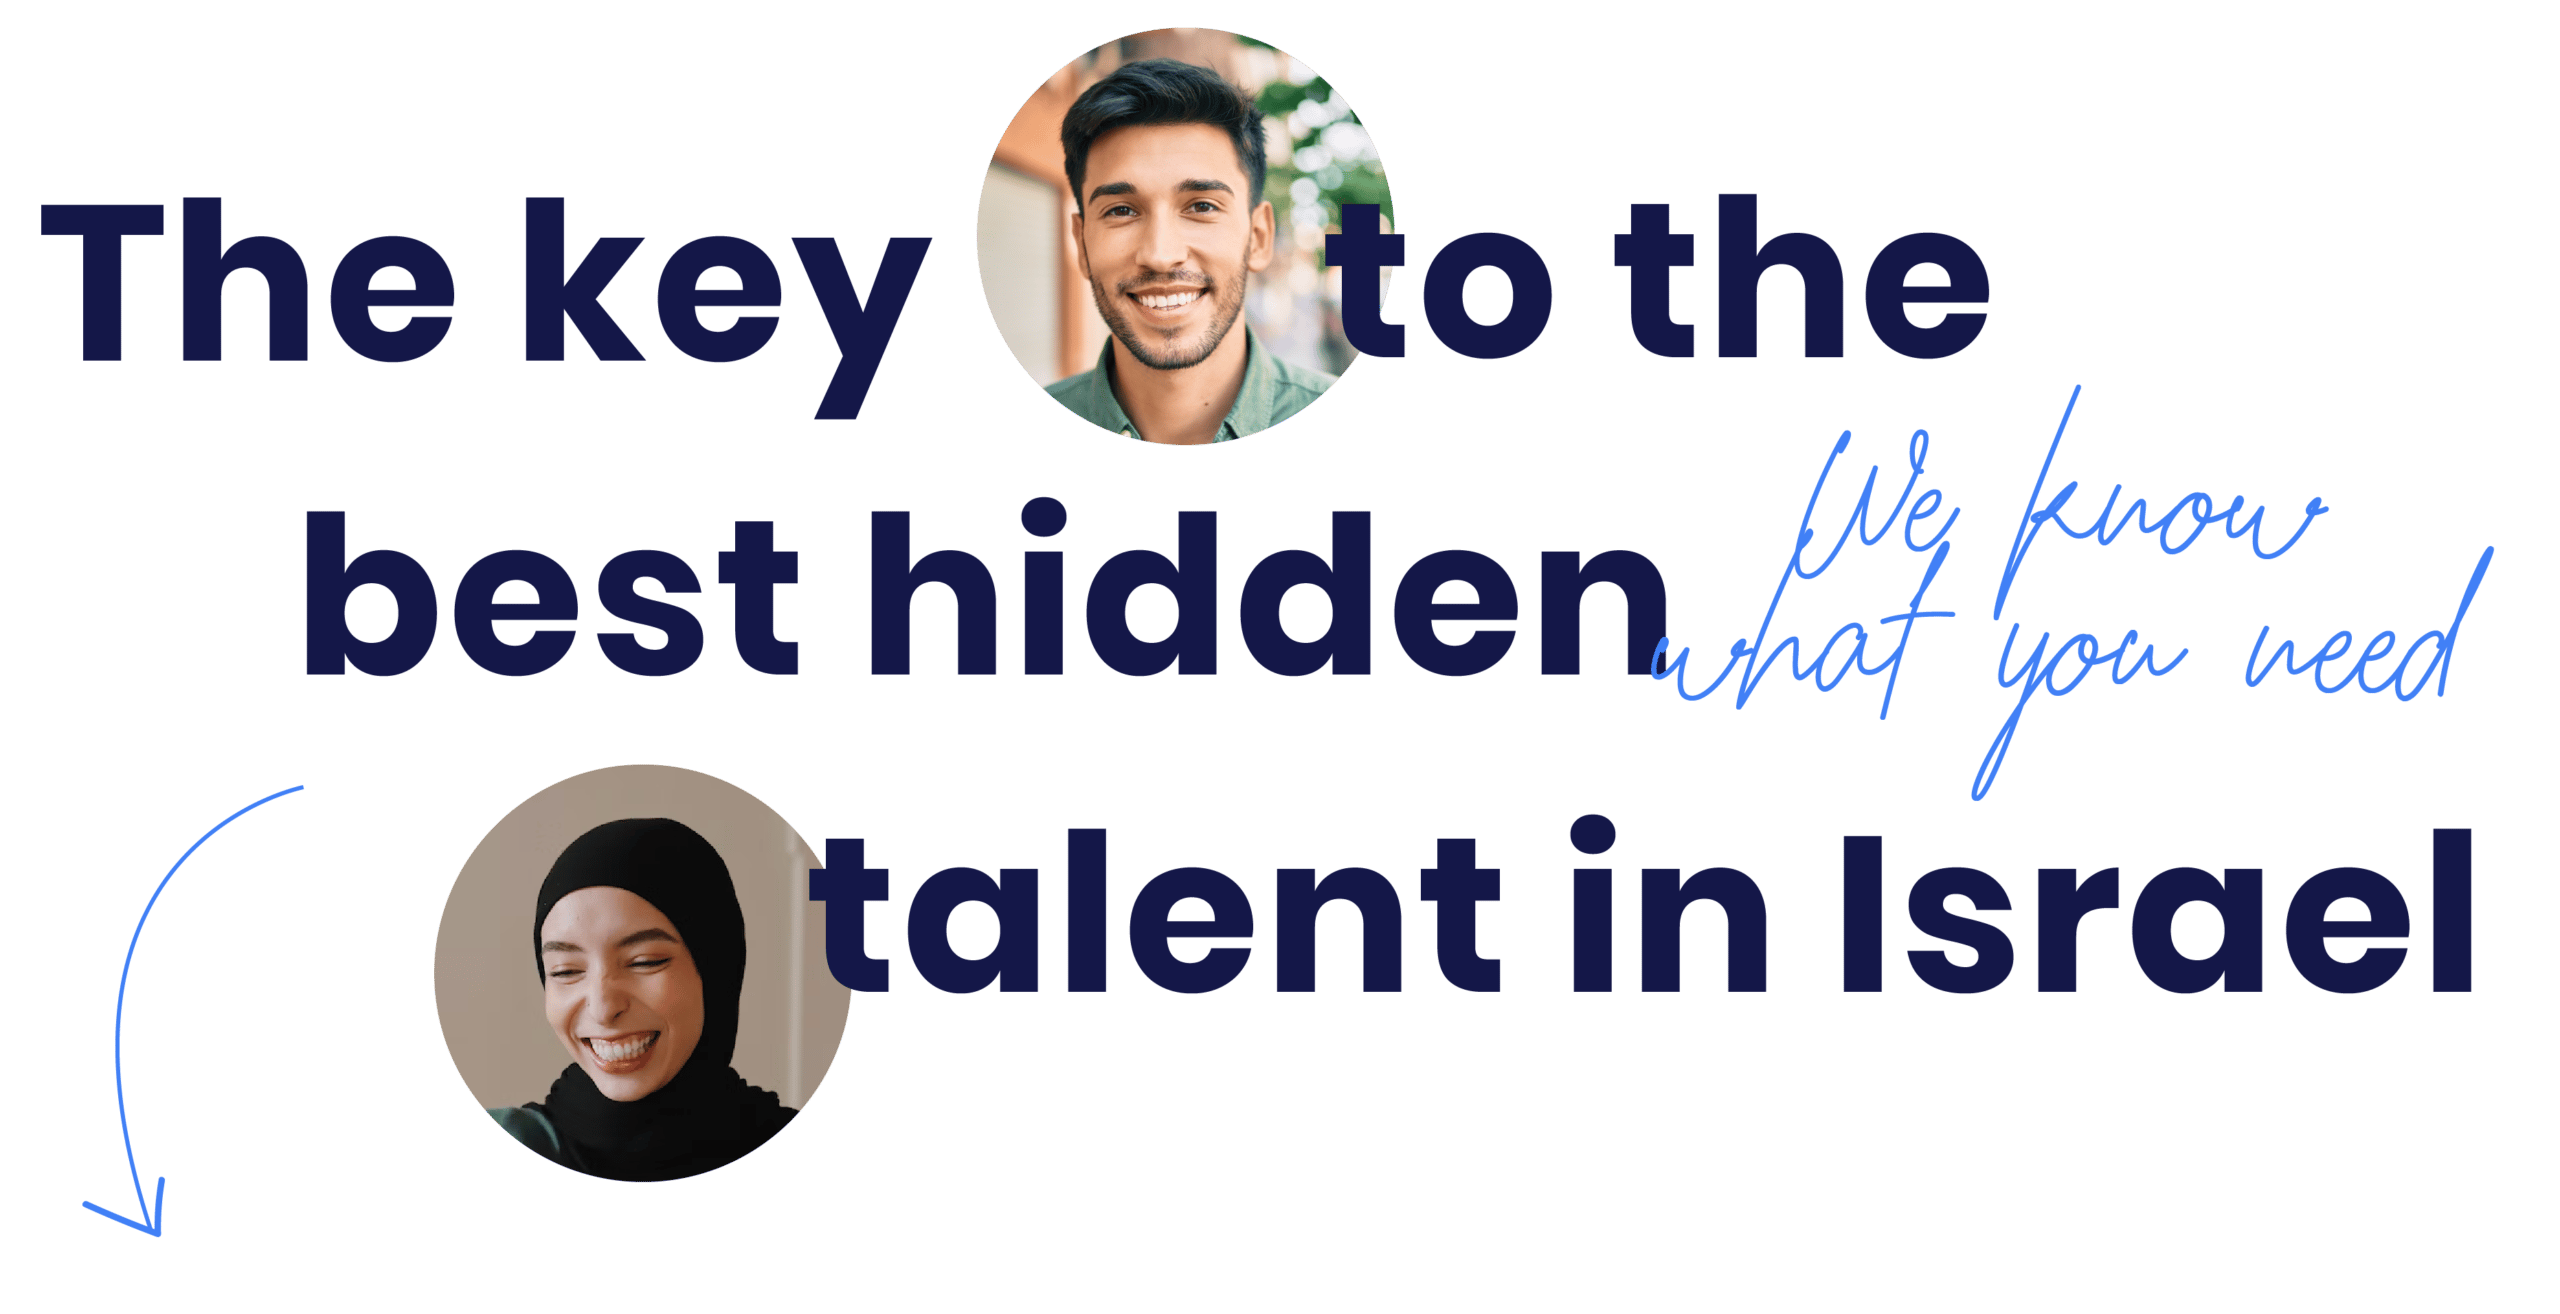 The key to the best hidden talent in israel